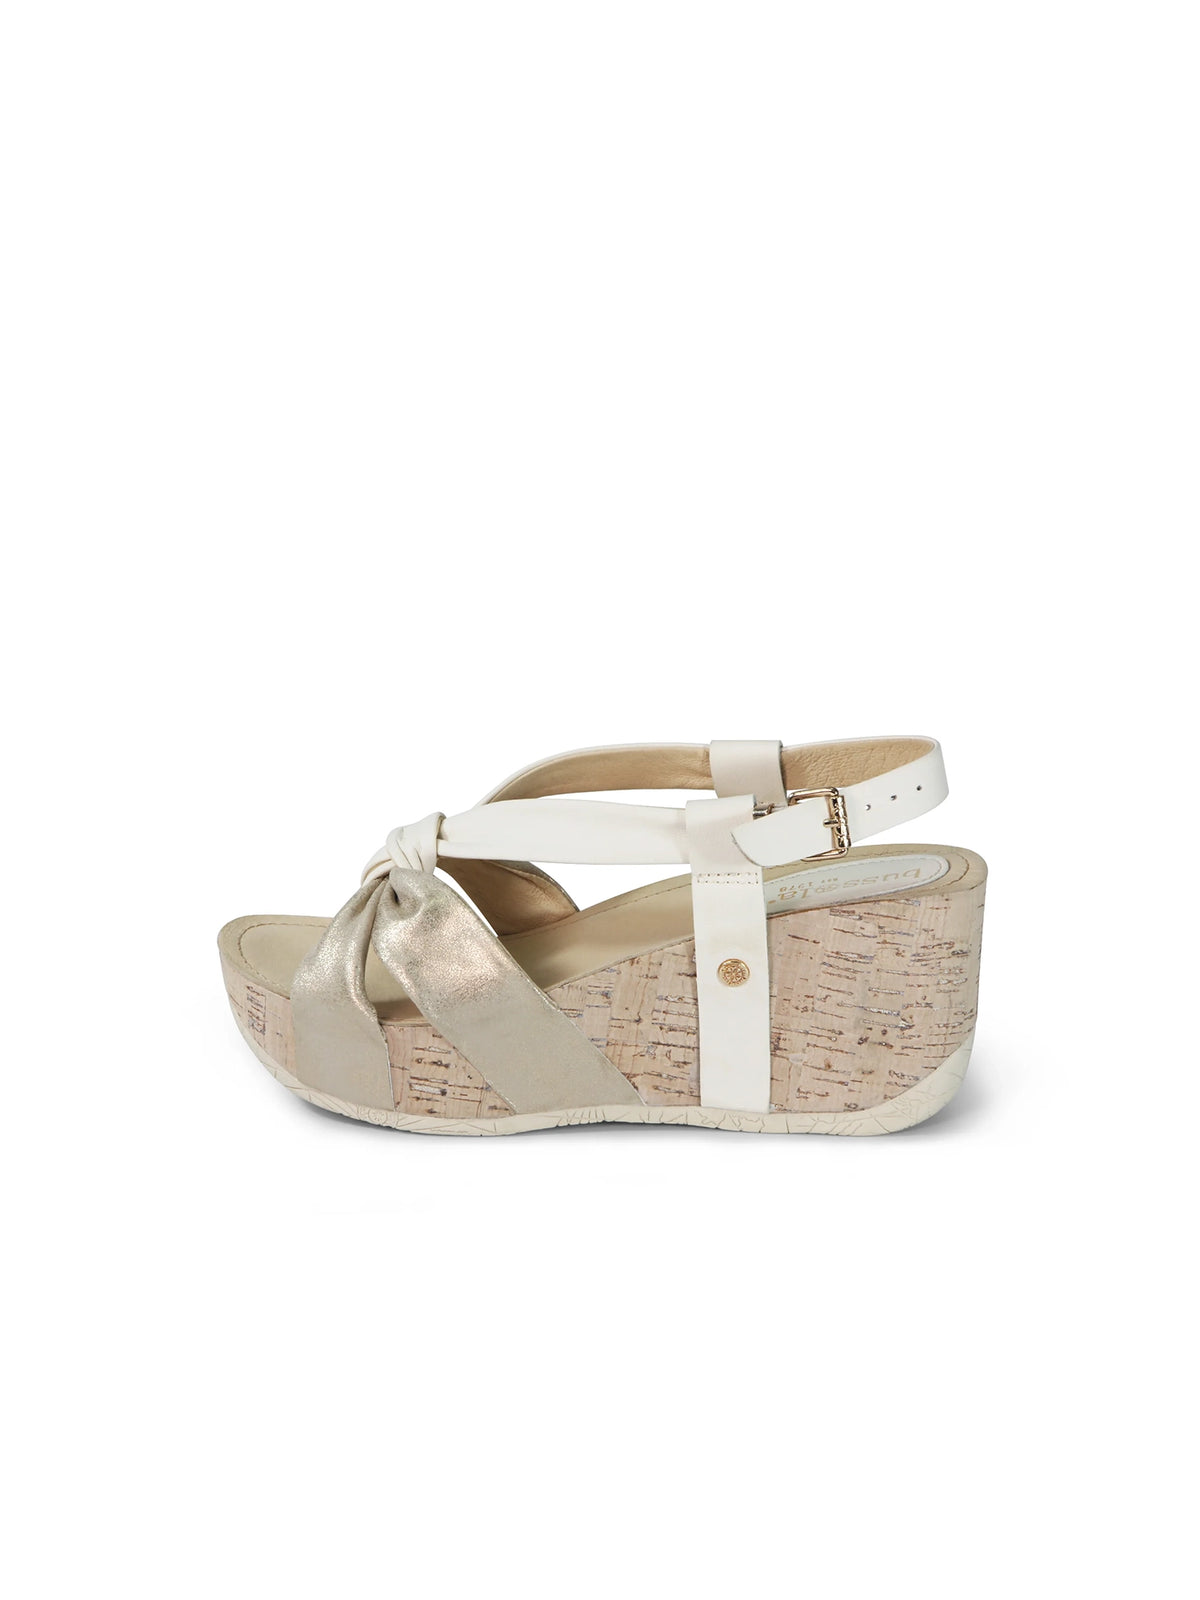 bussola formentera bow knot wedge sandals in gold